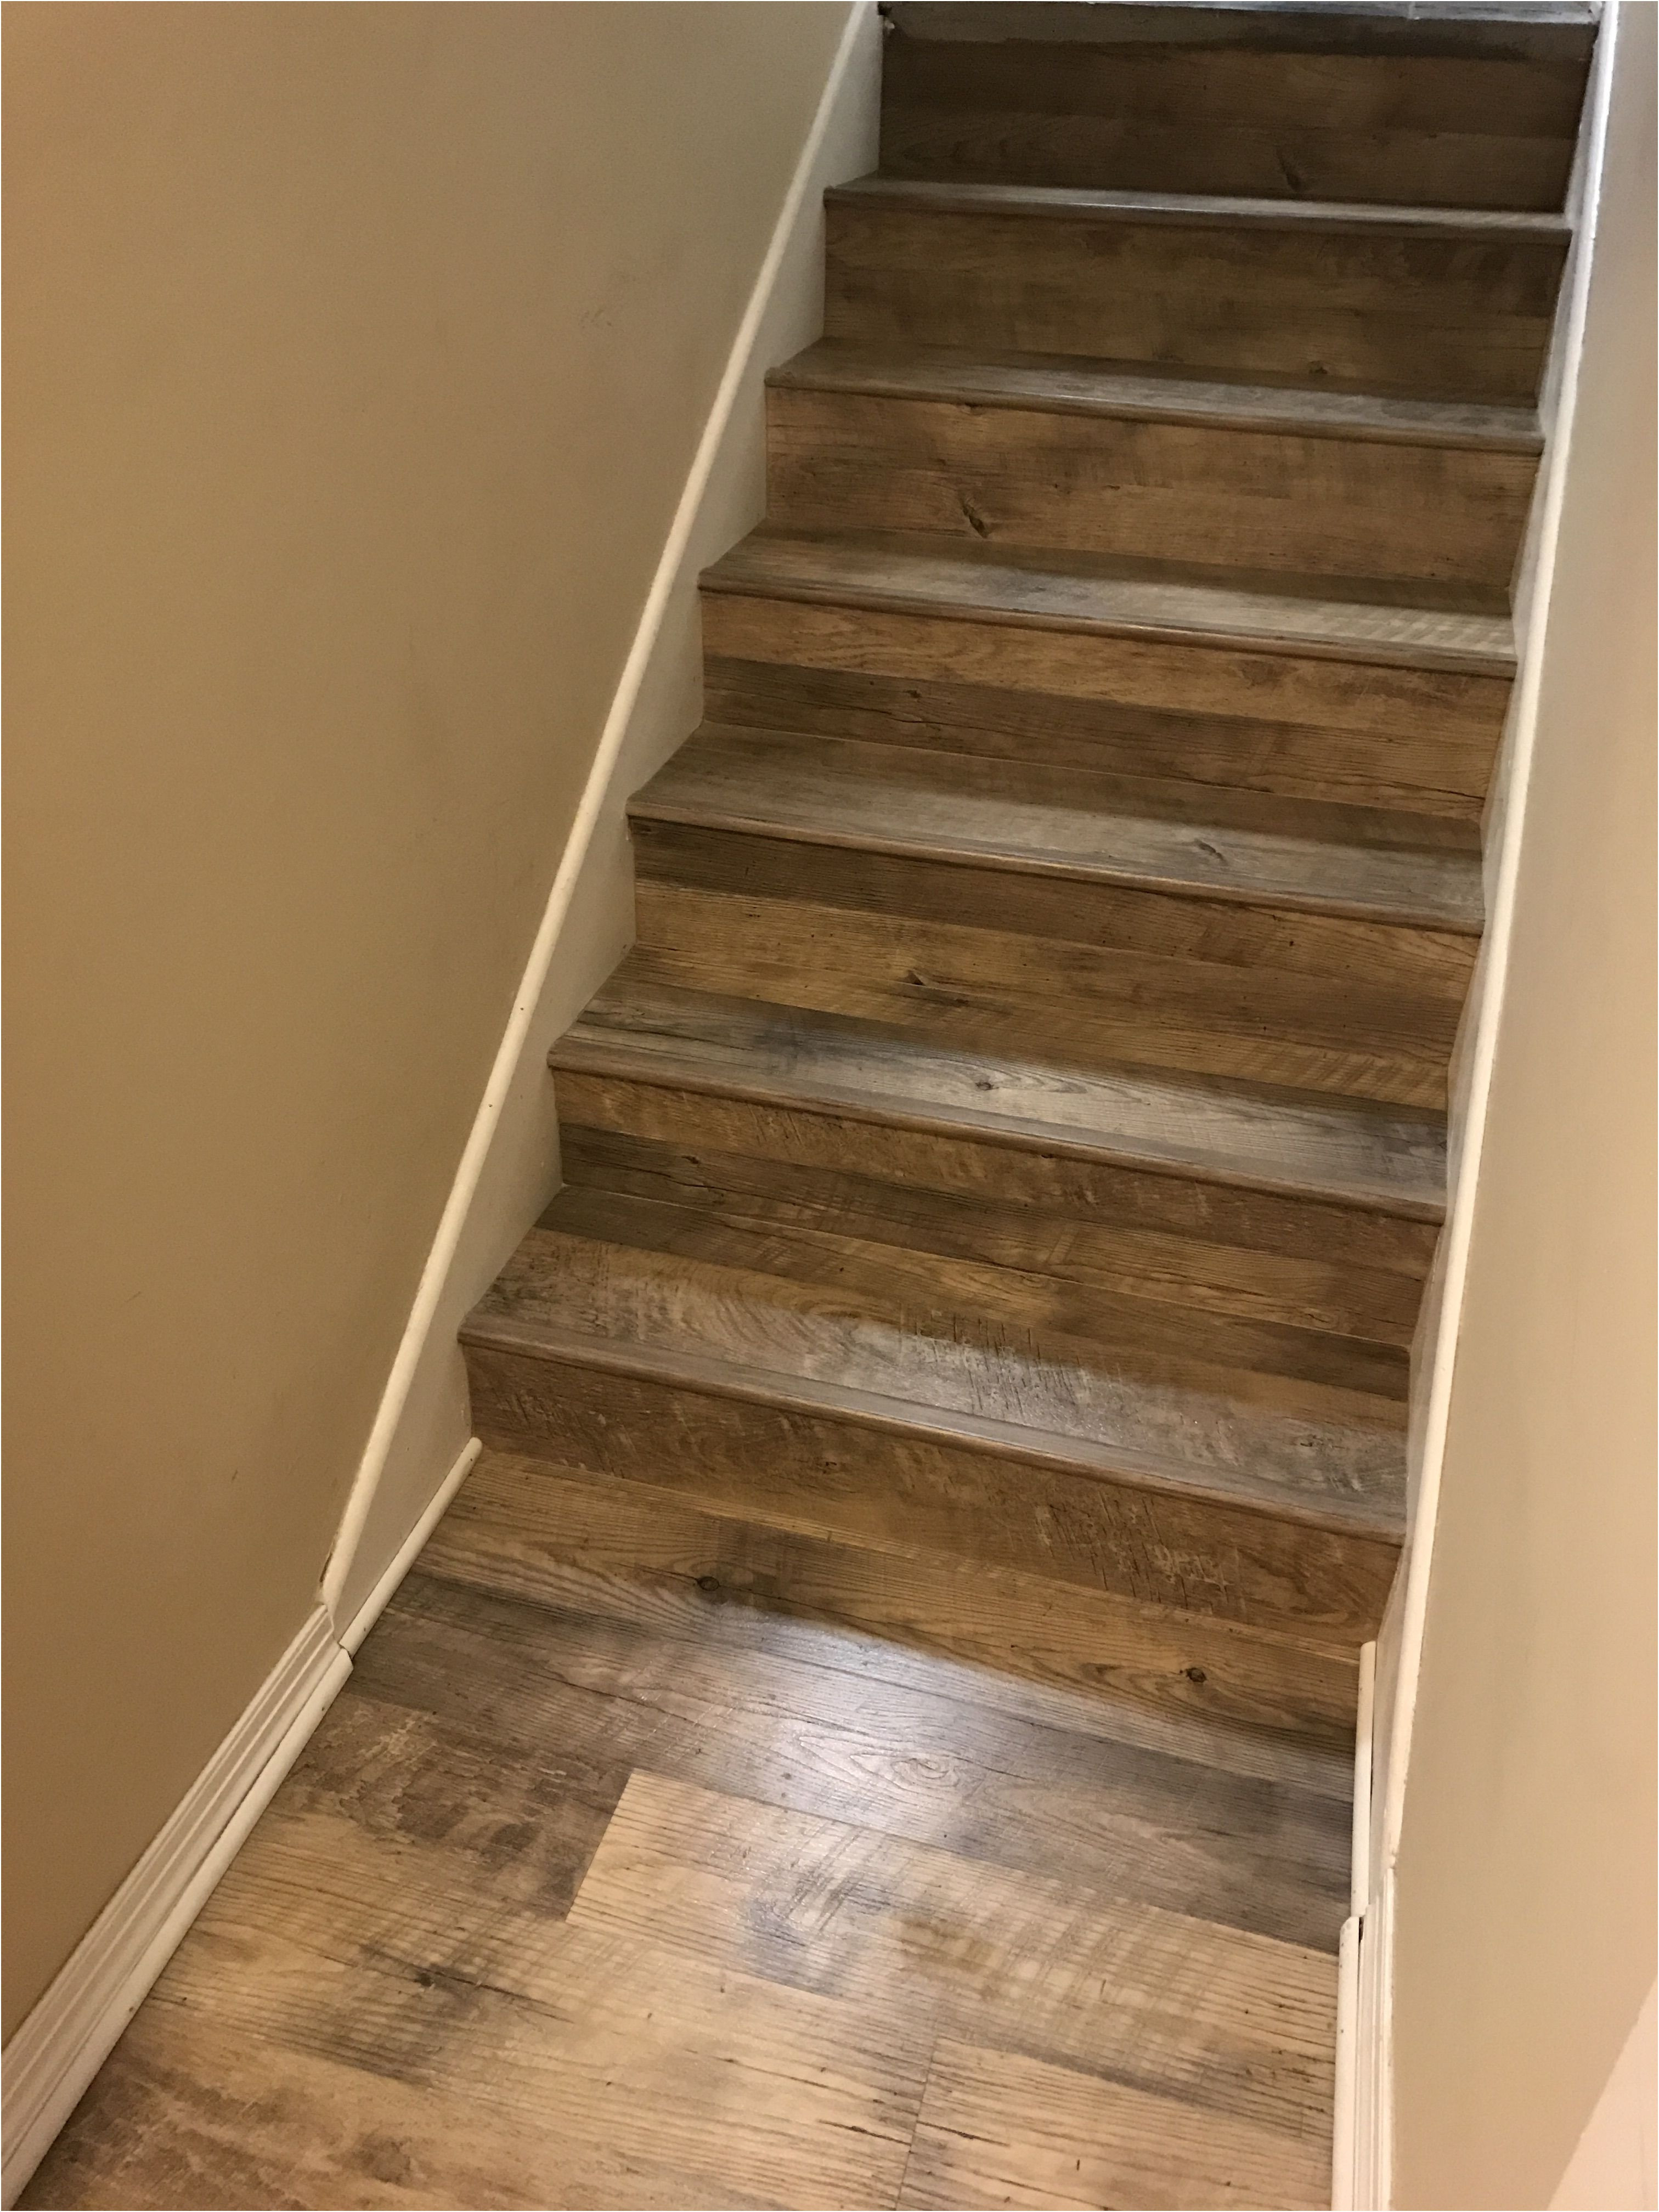 hardwood floor transition to stairs of 34 luxury stair nose for vinyl plank flooring photos flooring intended for stair nose for vinyl plank flooring beautiful 10 modest stair tread nose stock of 34 luxury